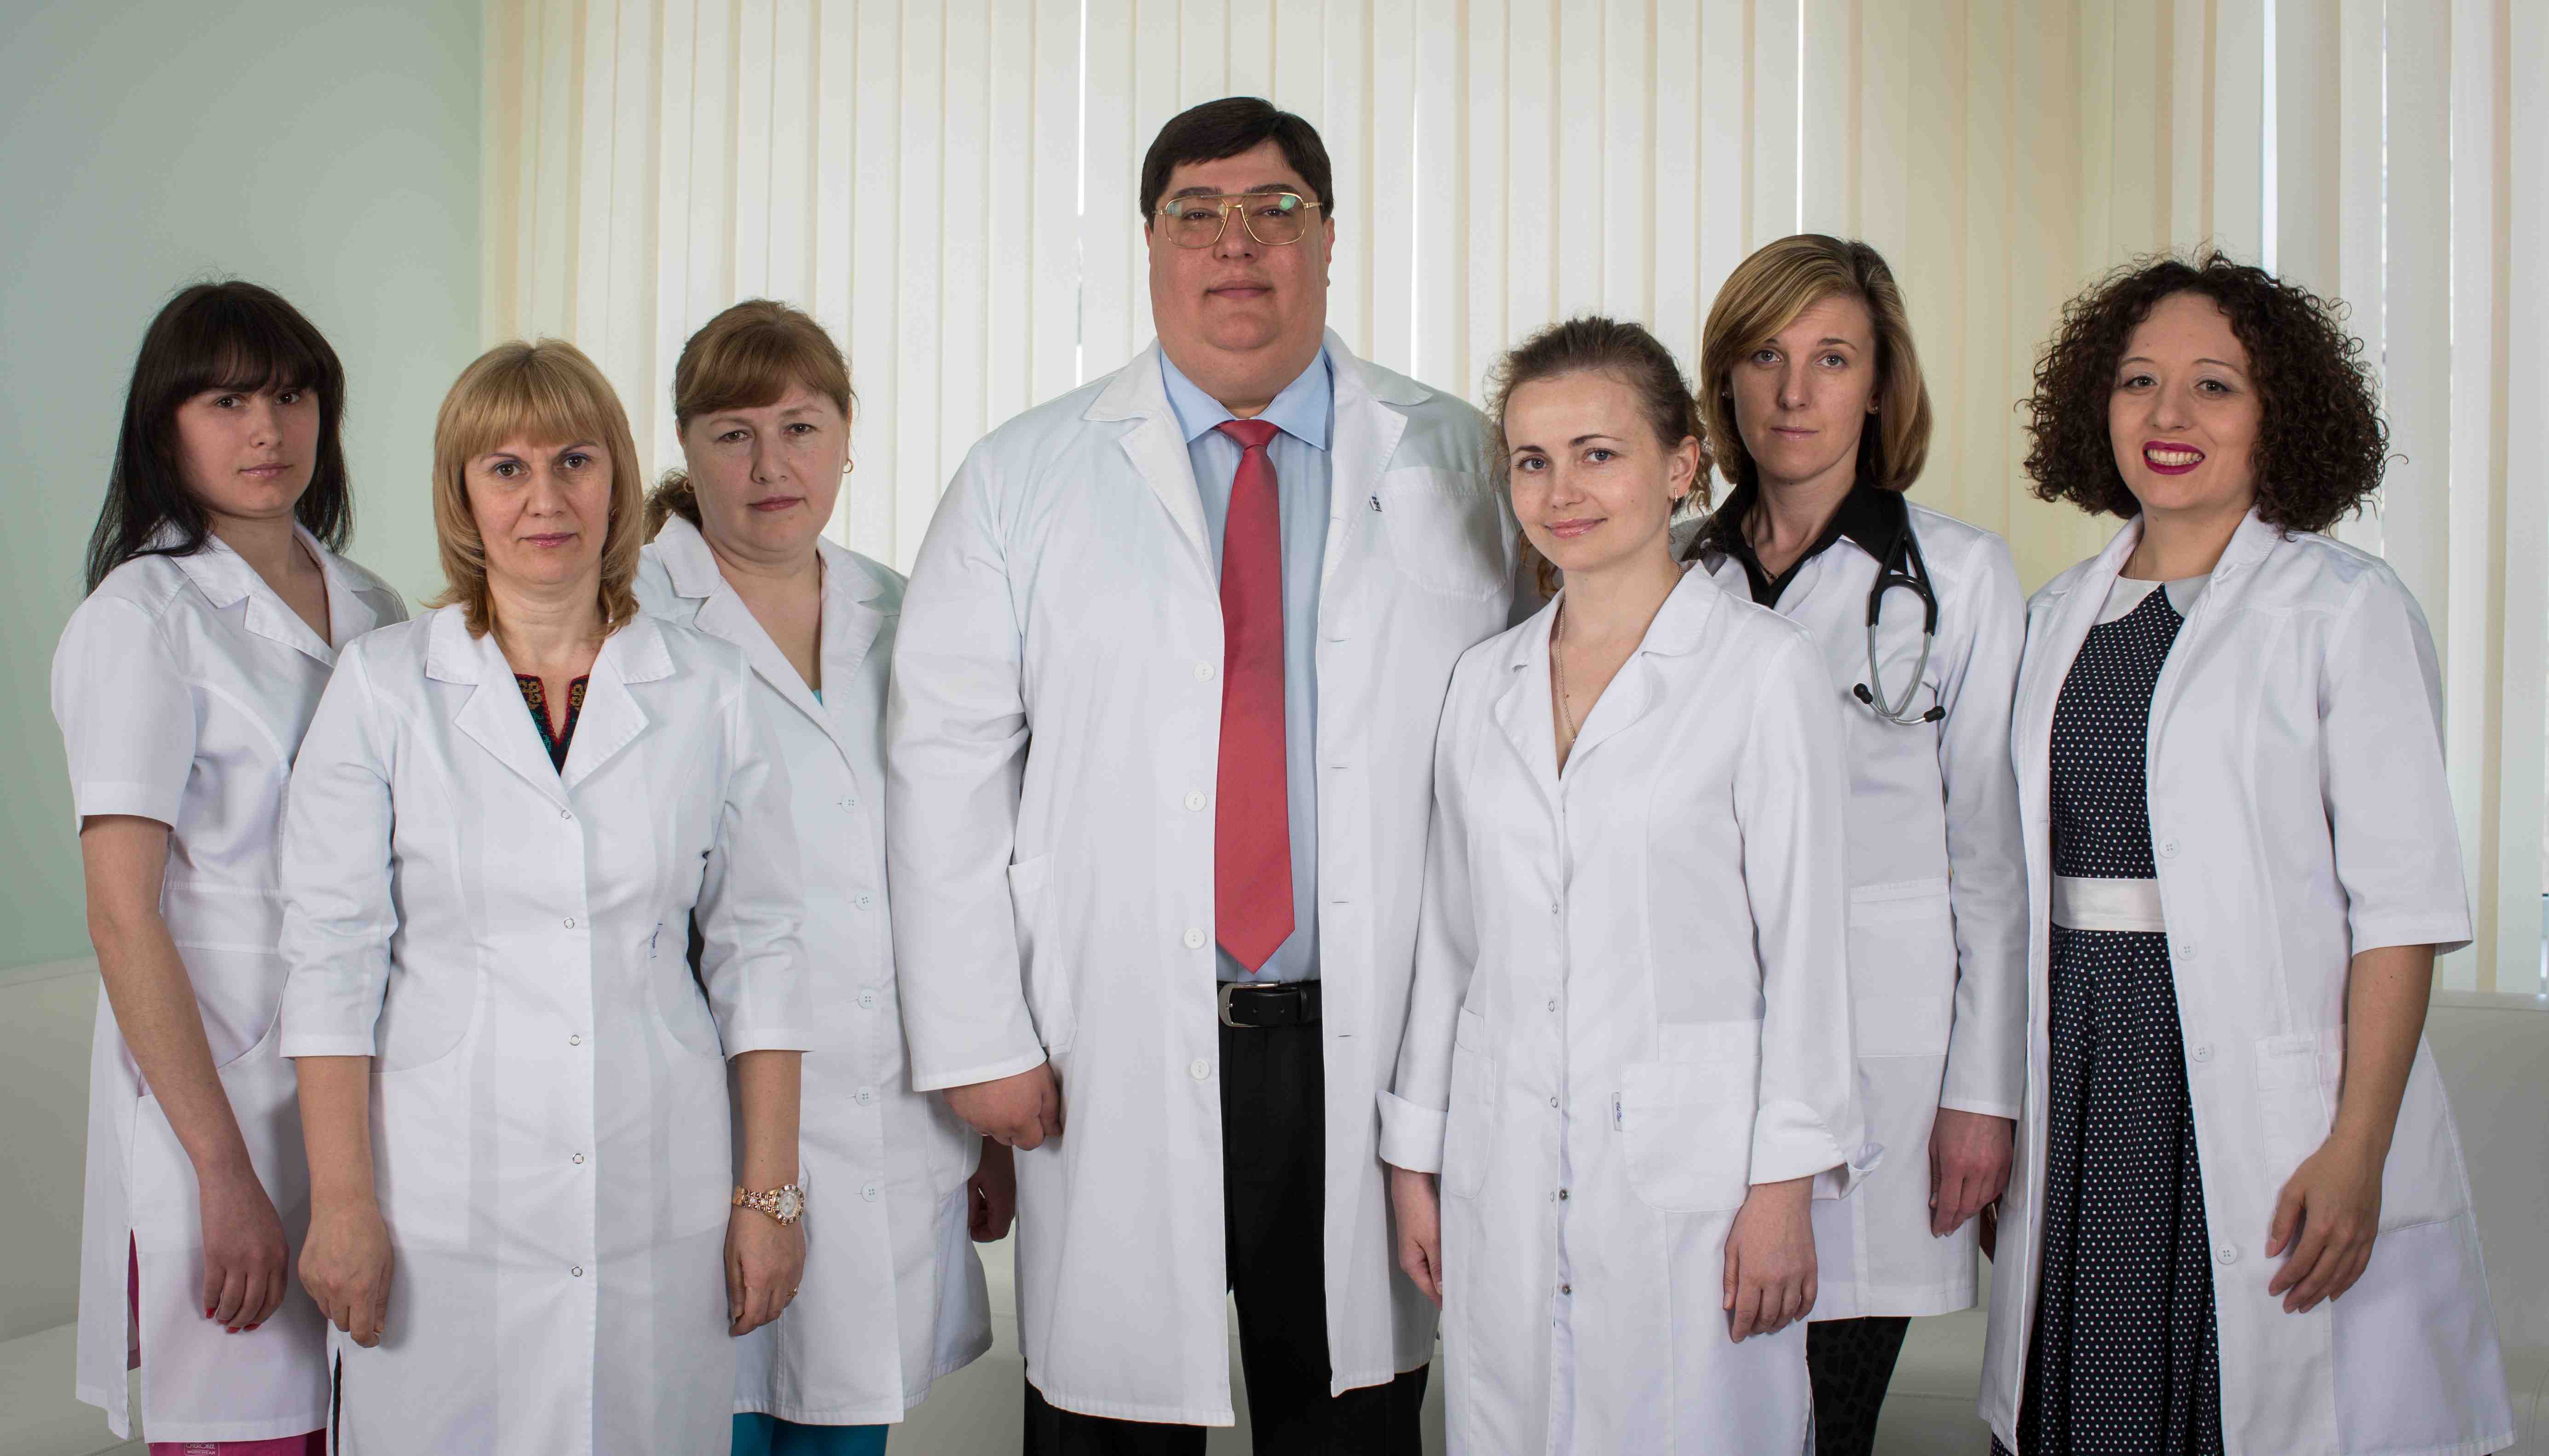 Real Patients Reviews of Stem Cell Treatment in Kyiv. Ukraine at Unique Cell Treatment Clinic Slider image 2